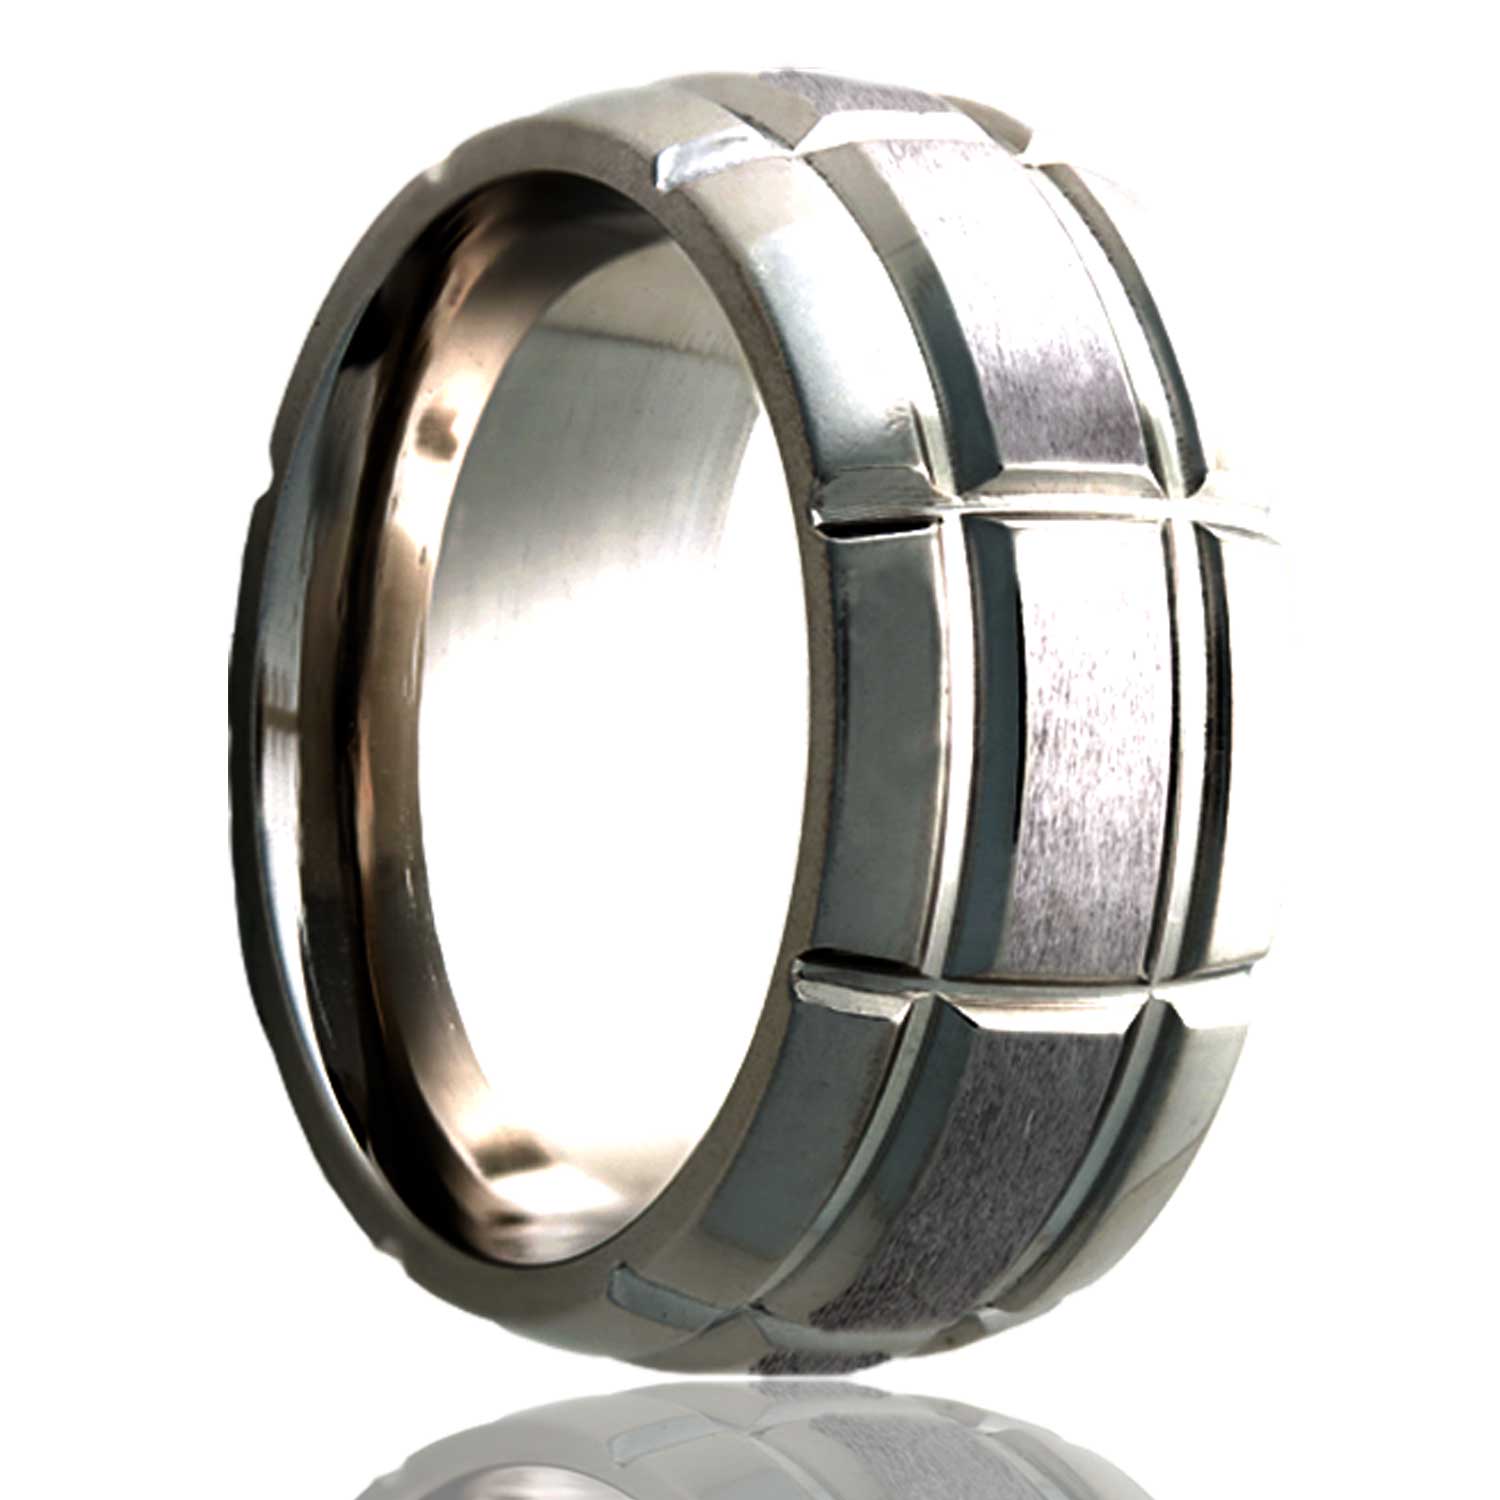 A intersecting groove pattern domed satin finish titanium wedding band displayed on a neutral white background.